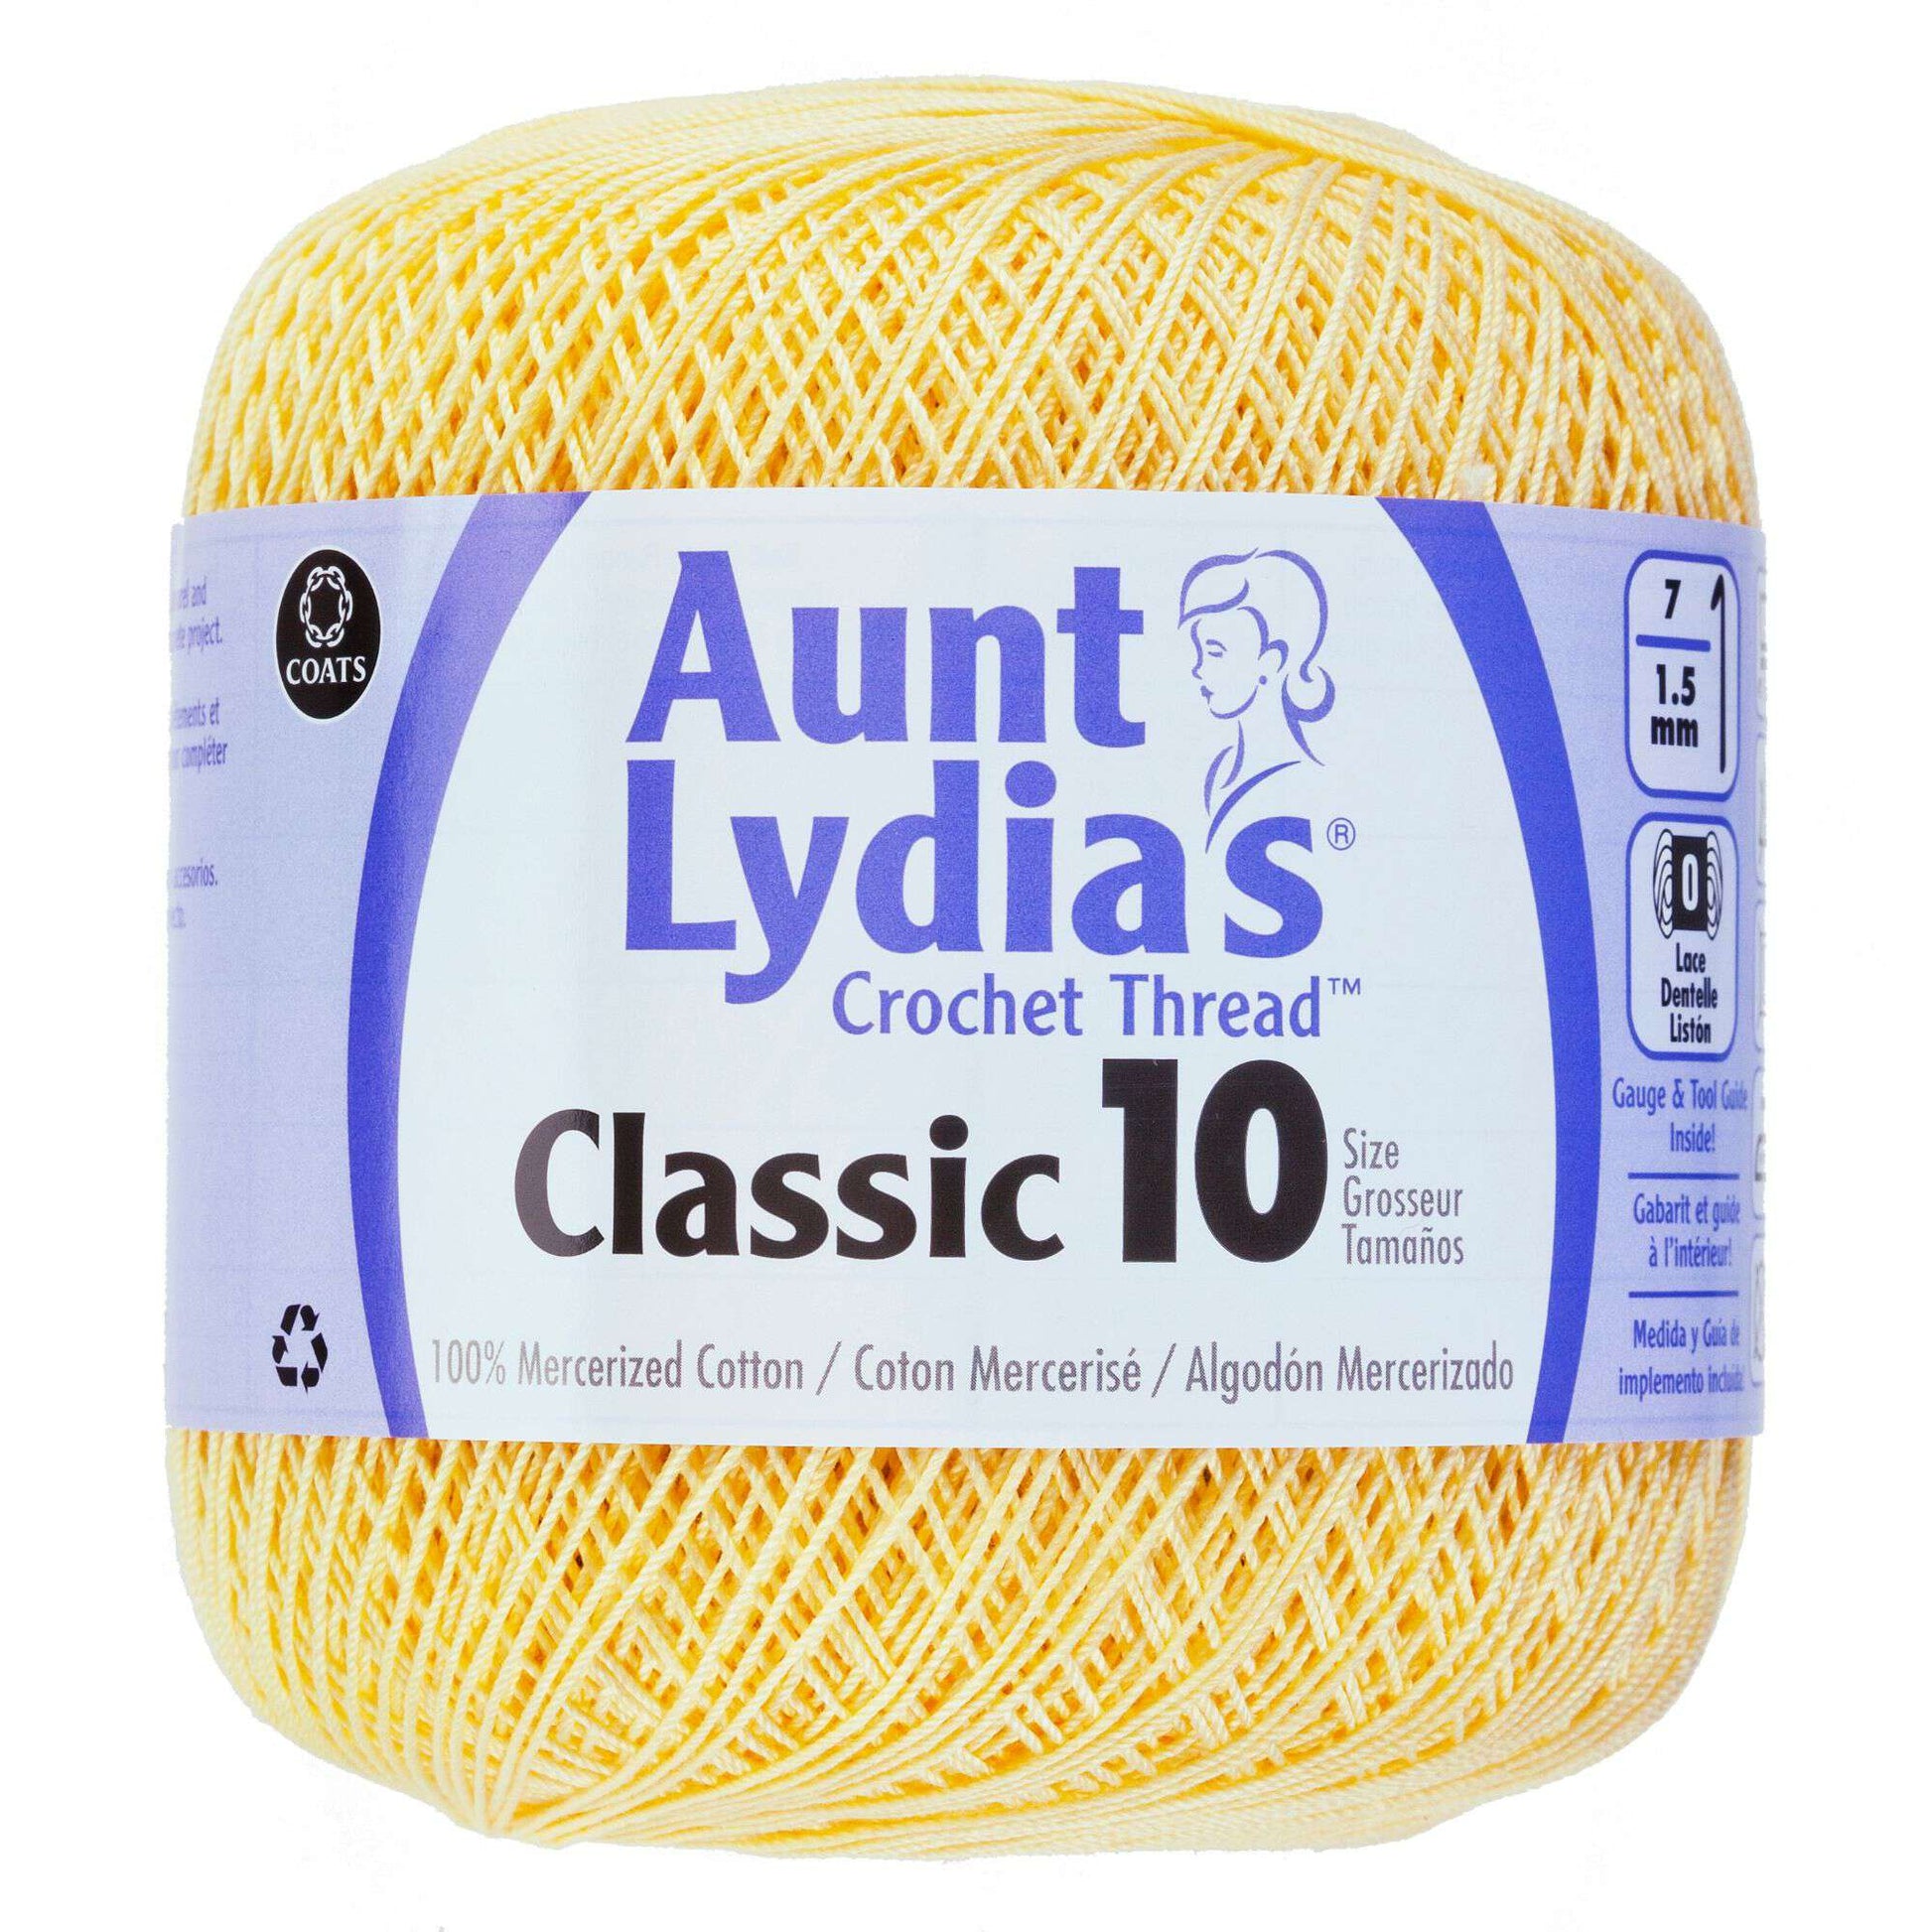 Aunt Lydia's Classic Crochet Thread Size 10 - Clearance shades